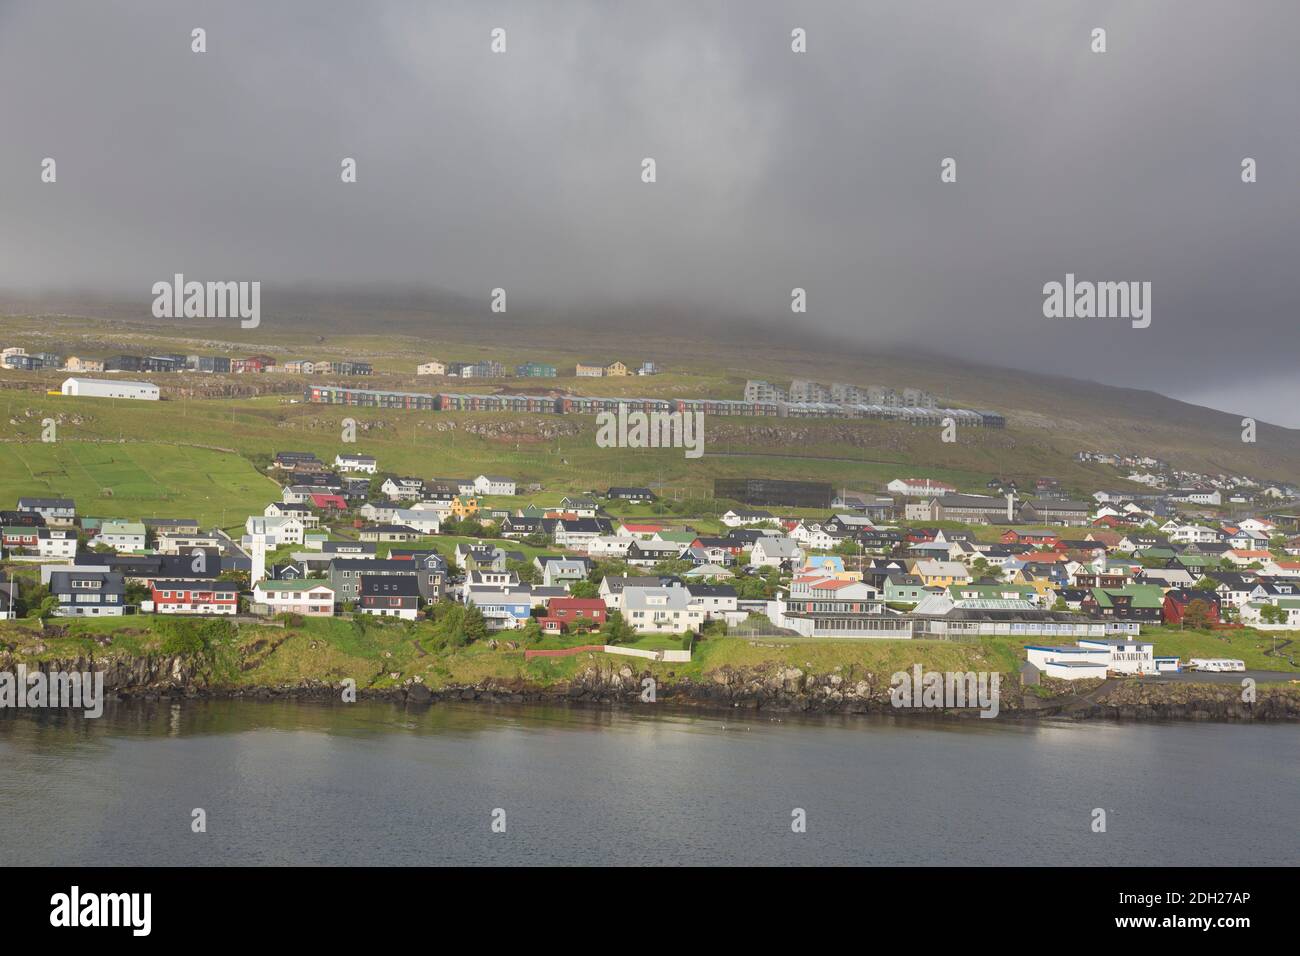 View over Torshavn, capital and largest city of the Faroe Islands / Faeroe Islands on the island Streymoy Stock Photo